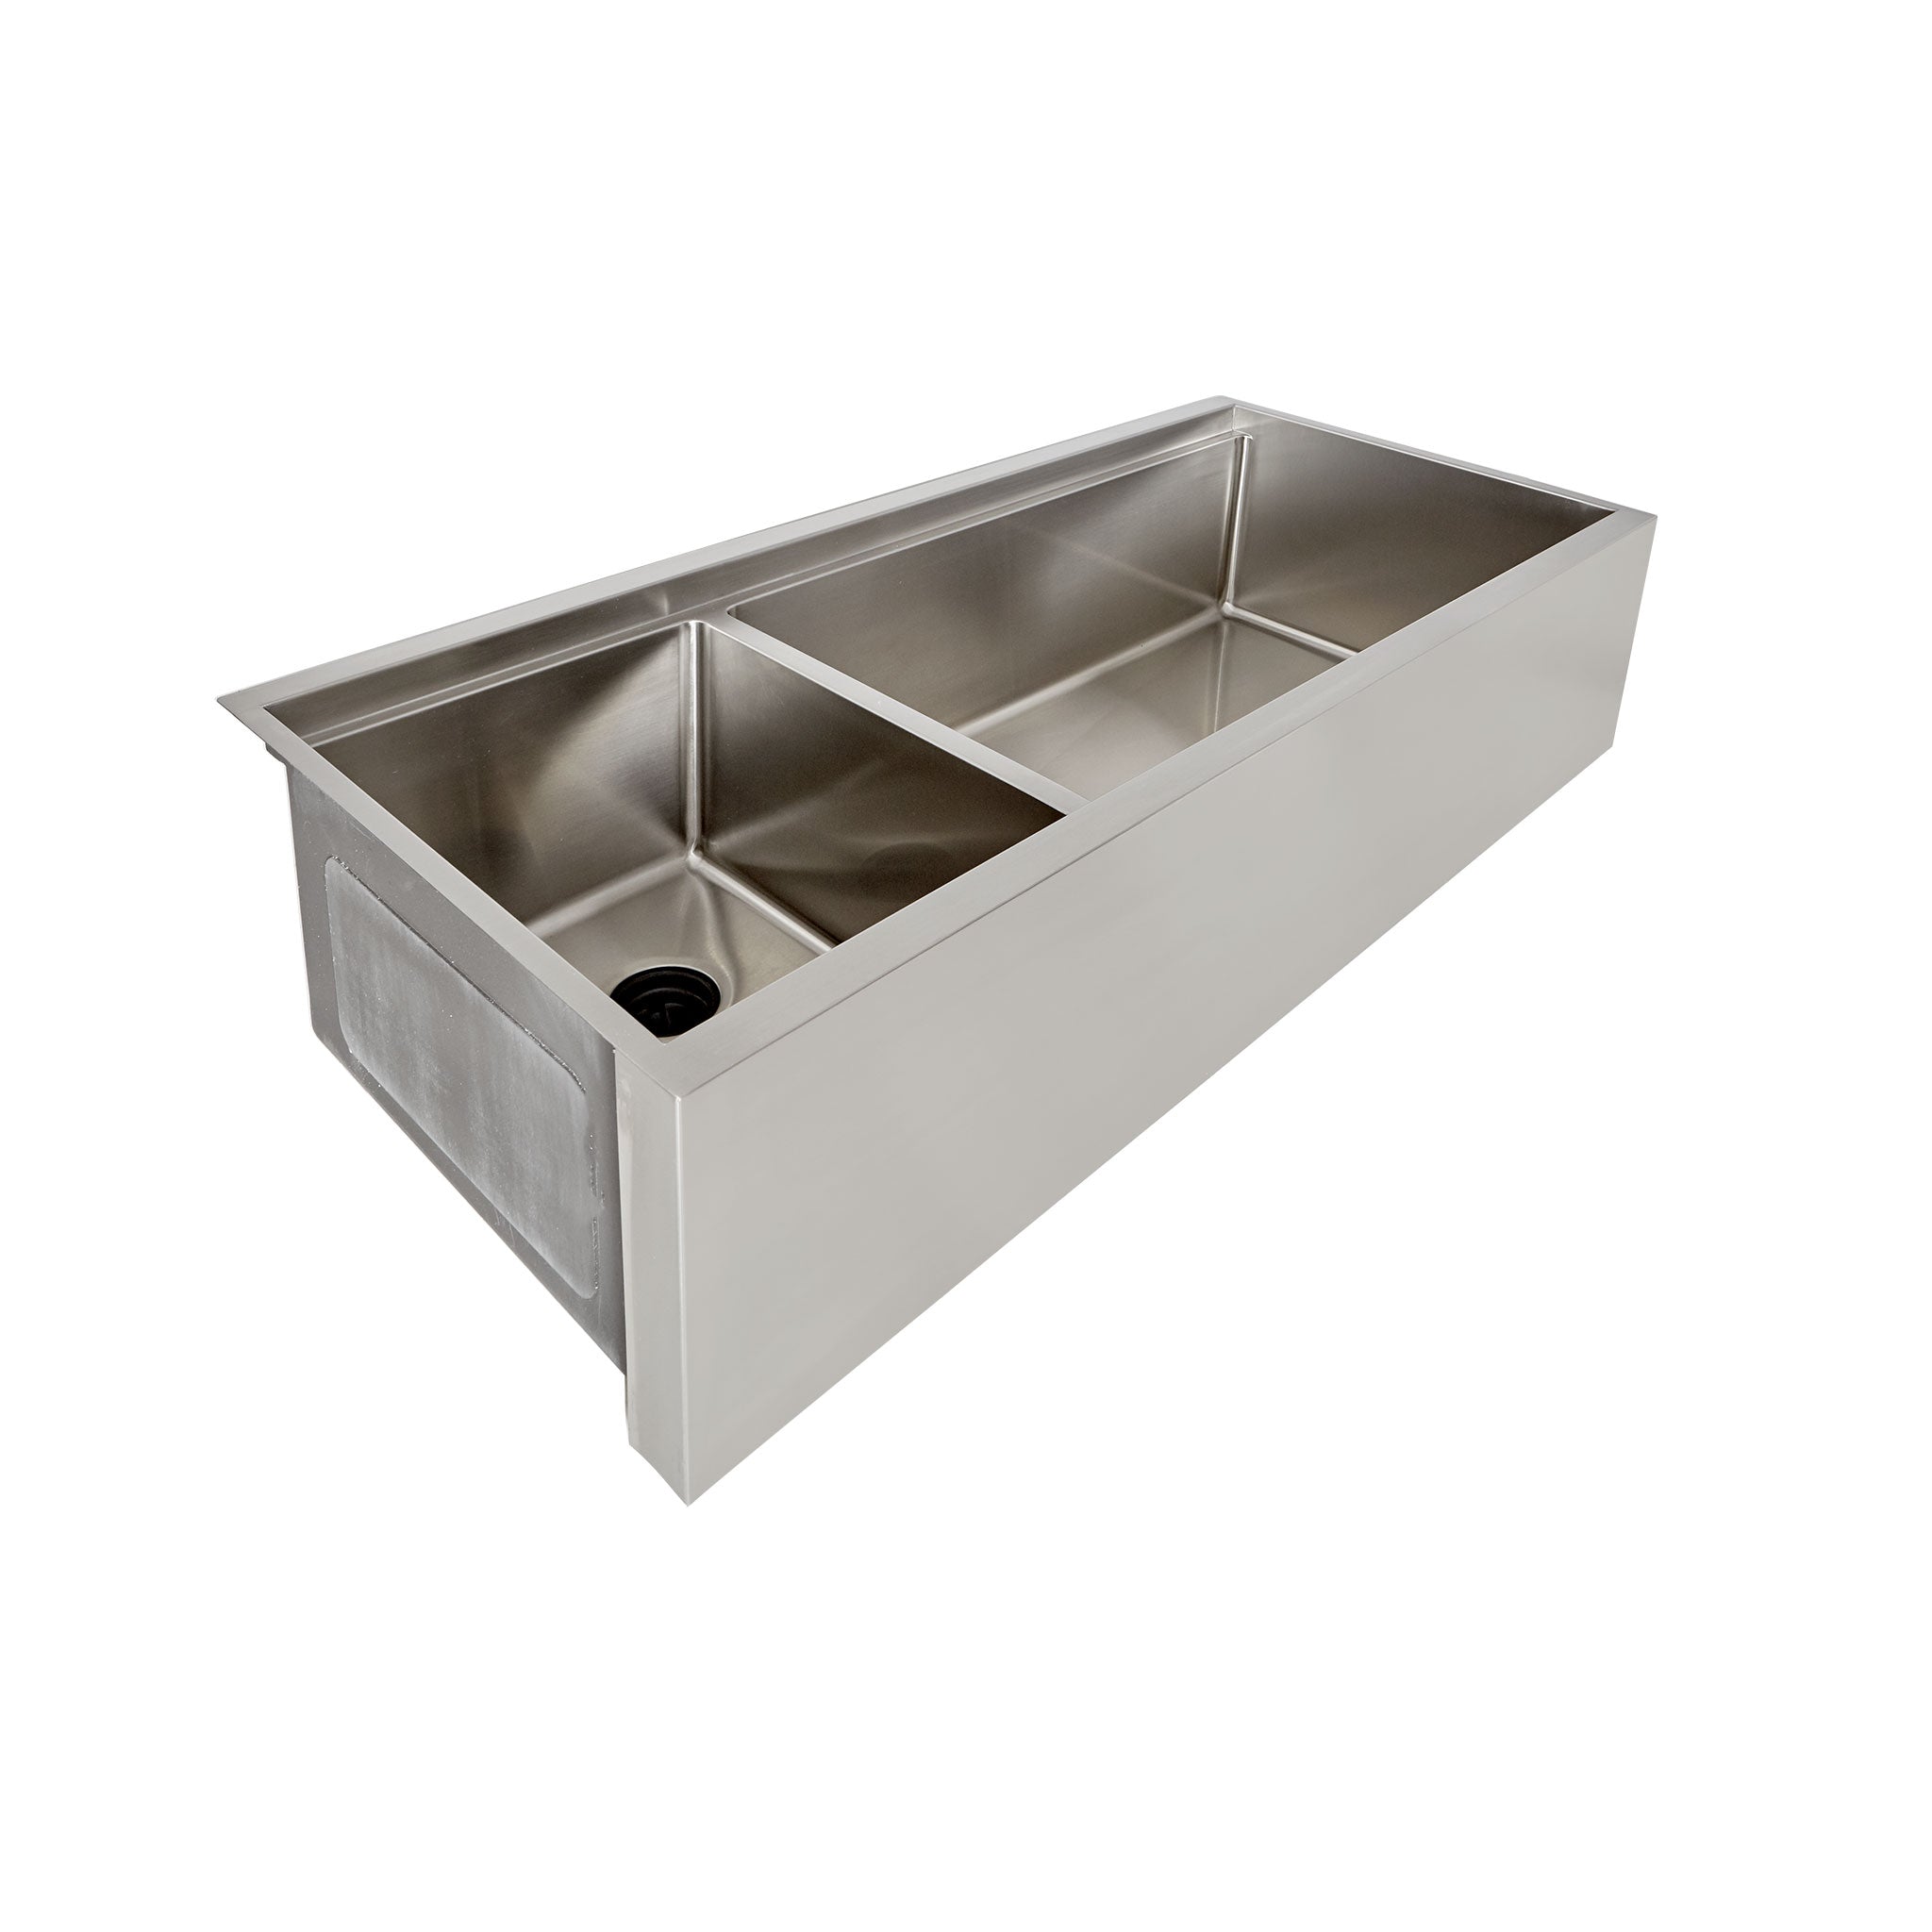 Double basin 46” workstation apron front kitchen sink with corner drain and ledge for accessories